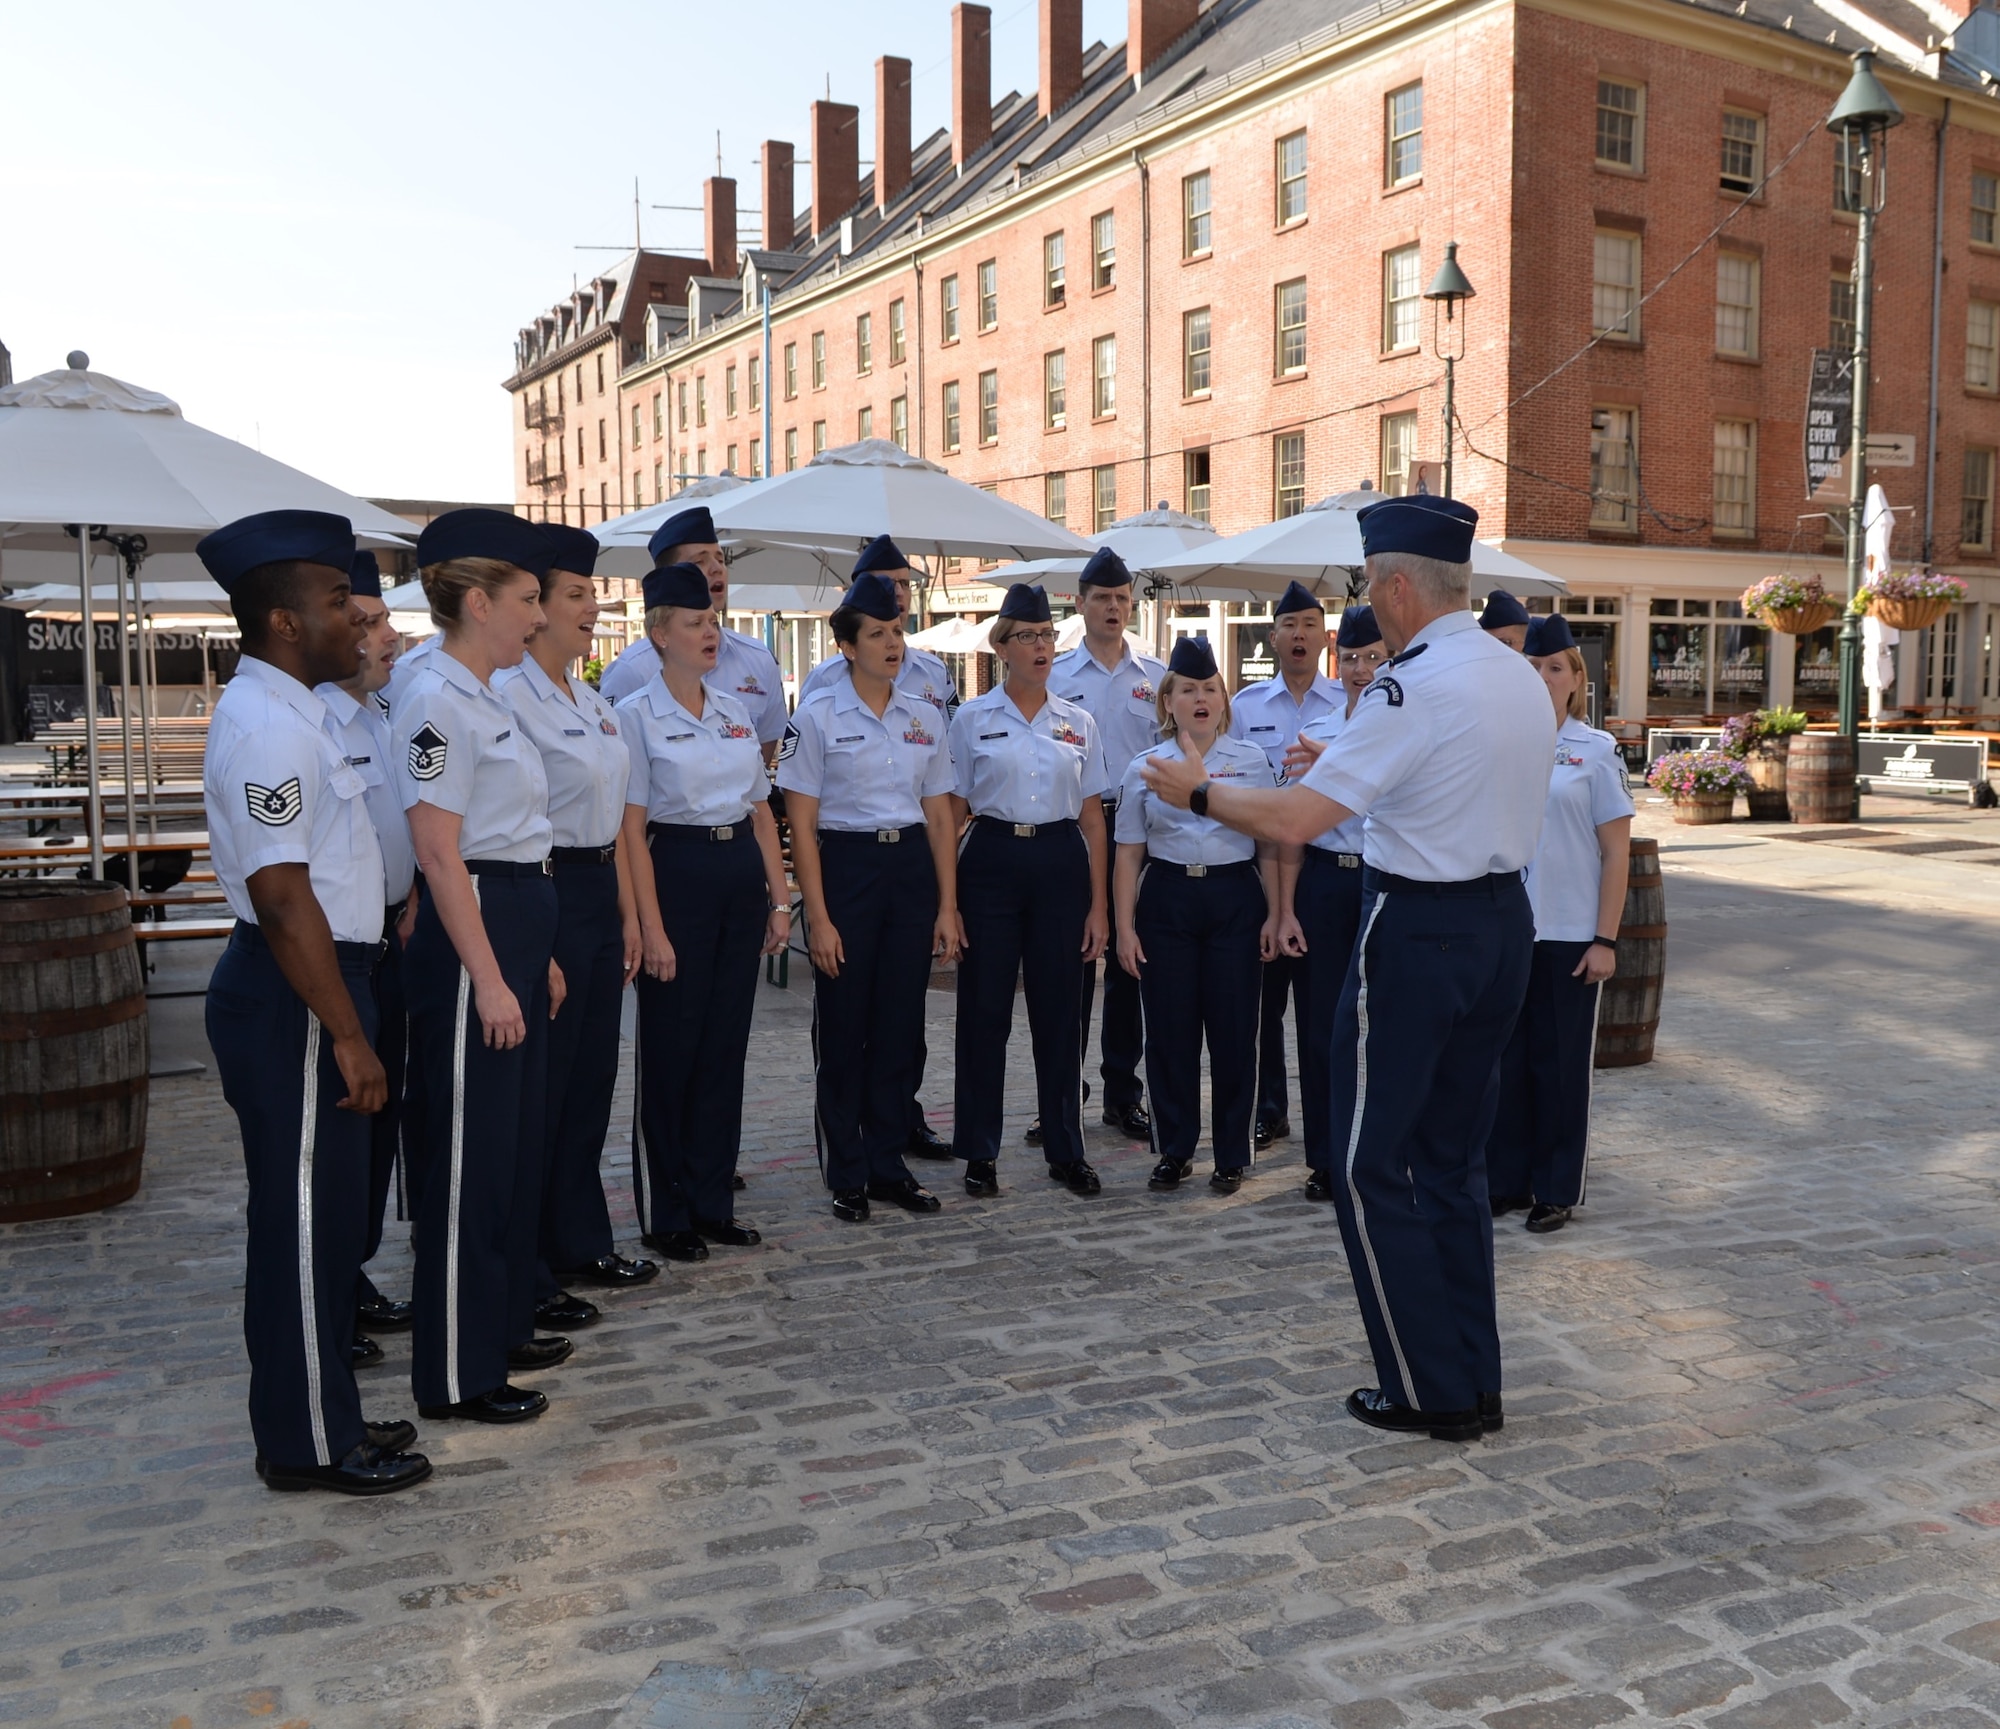 The Singing Sergeants, led by conductor Col. Larry Lang, perform for Fox 5’s “Good Day New York” show at the New York Seaport on July 3, 2015. This performance was part of a larger five-day tour in New York City to represent the Air Force on the nation's birthday (U.S. Air Force photo/1Lt. Esther Willett).